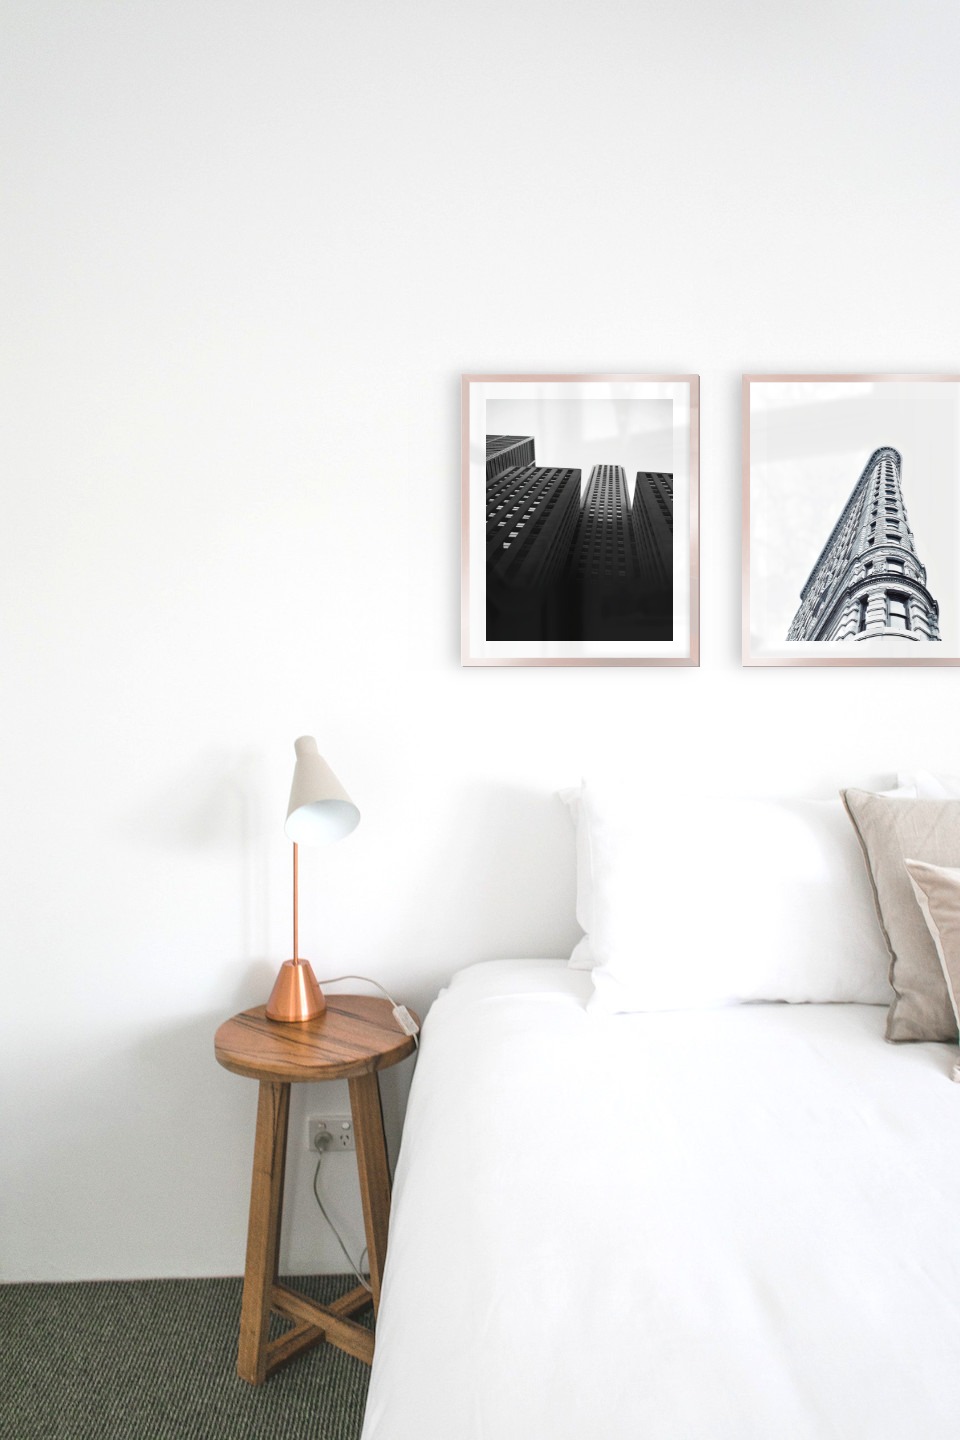 Gallery wall with picture frames in copper in sizes 40x50 with prints "High buildings" and "Gray building"